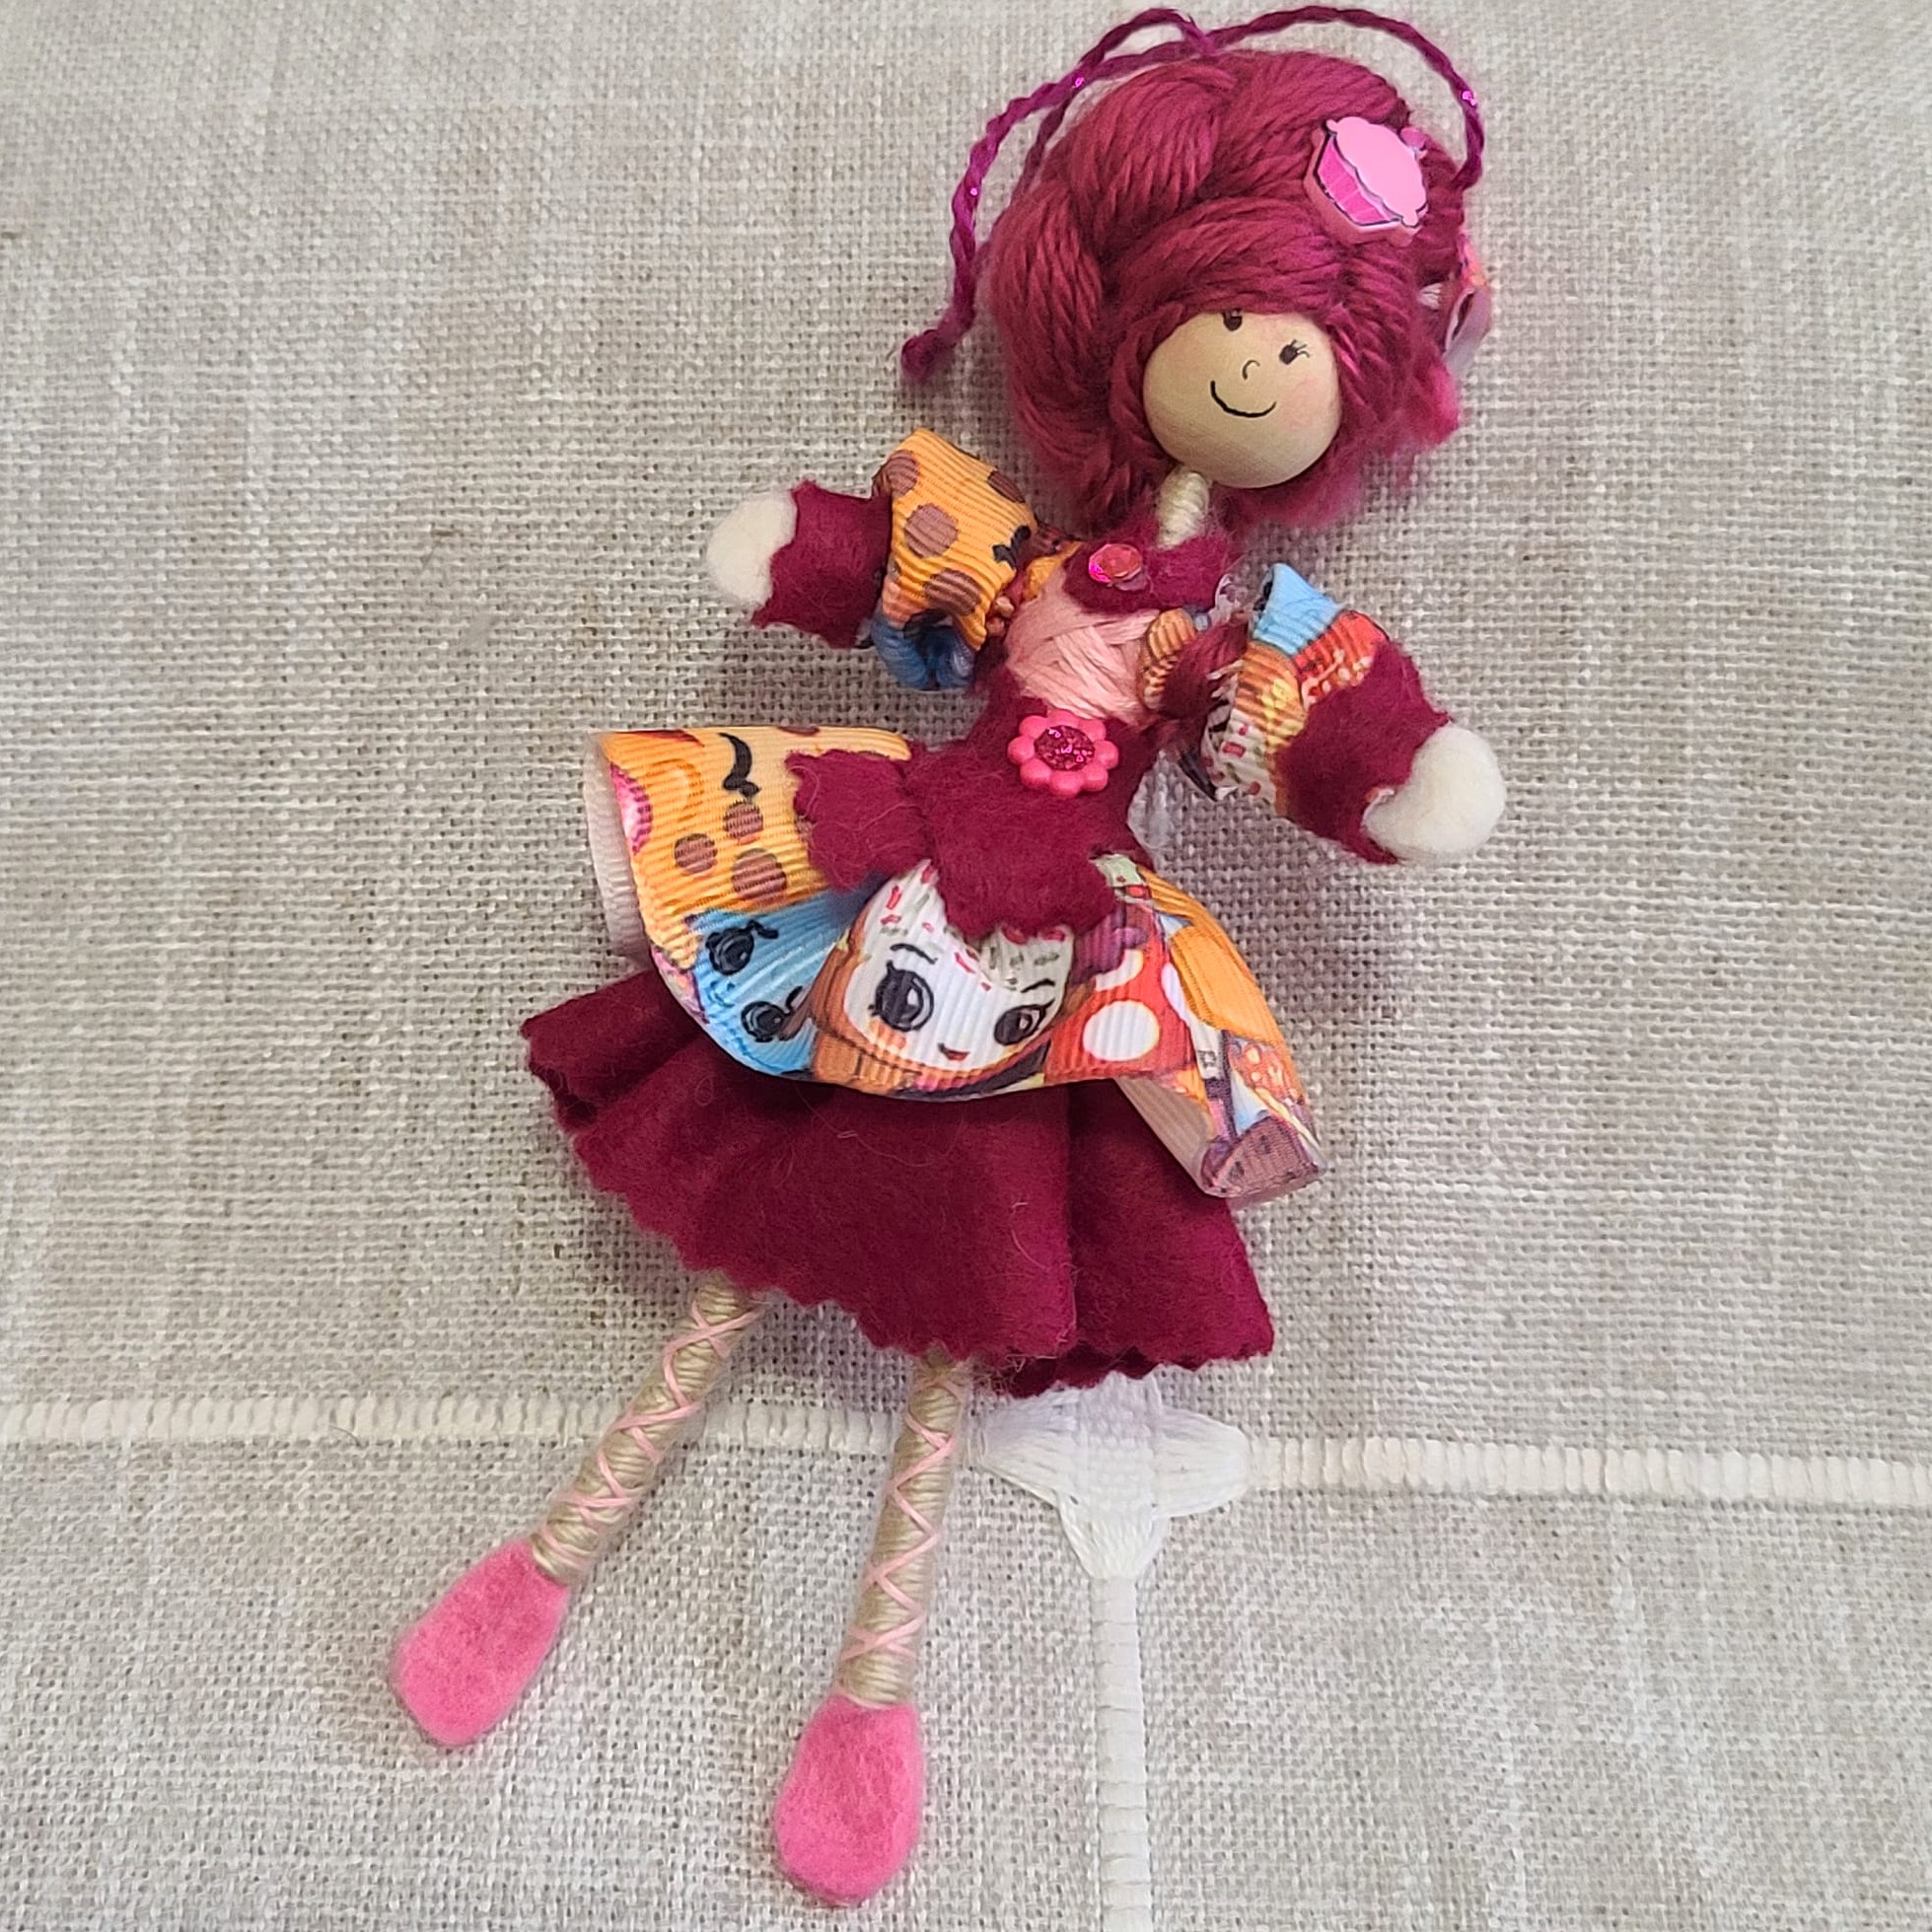 Fushia pink doll with licensed Shopkins fabric as dress